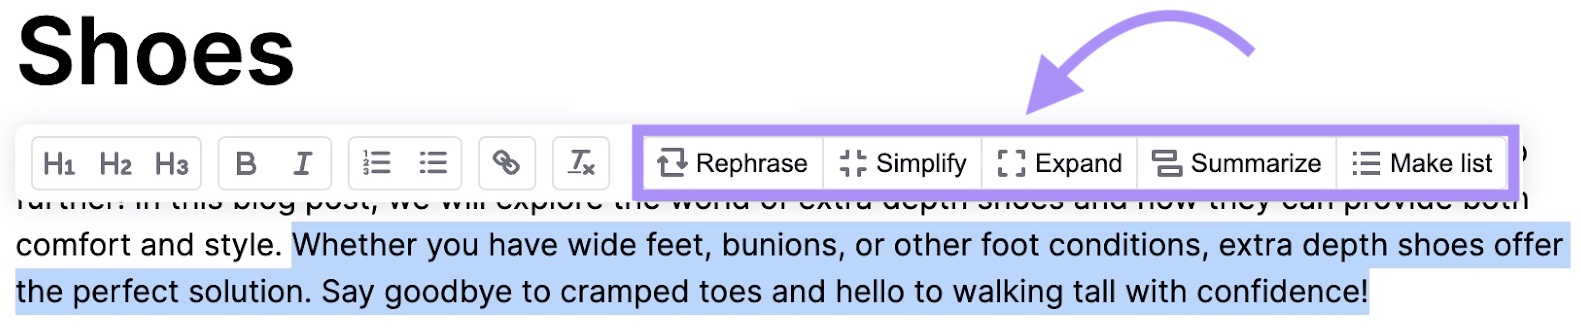 “Rephrase,” “Simplify,” “Expand,” “Summarize,” and “Make list" options highlighted